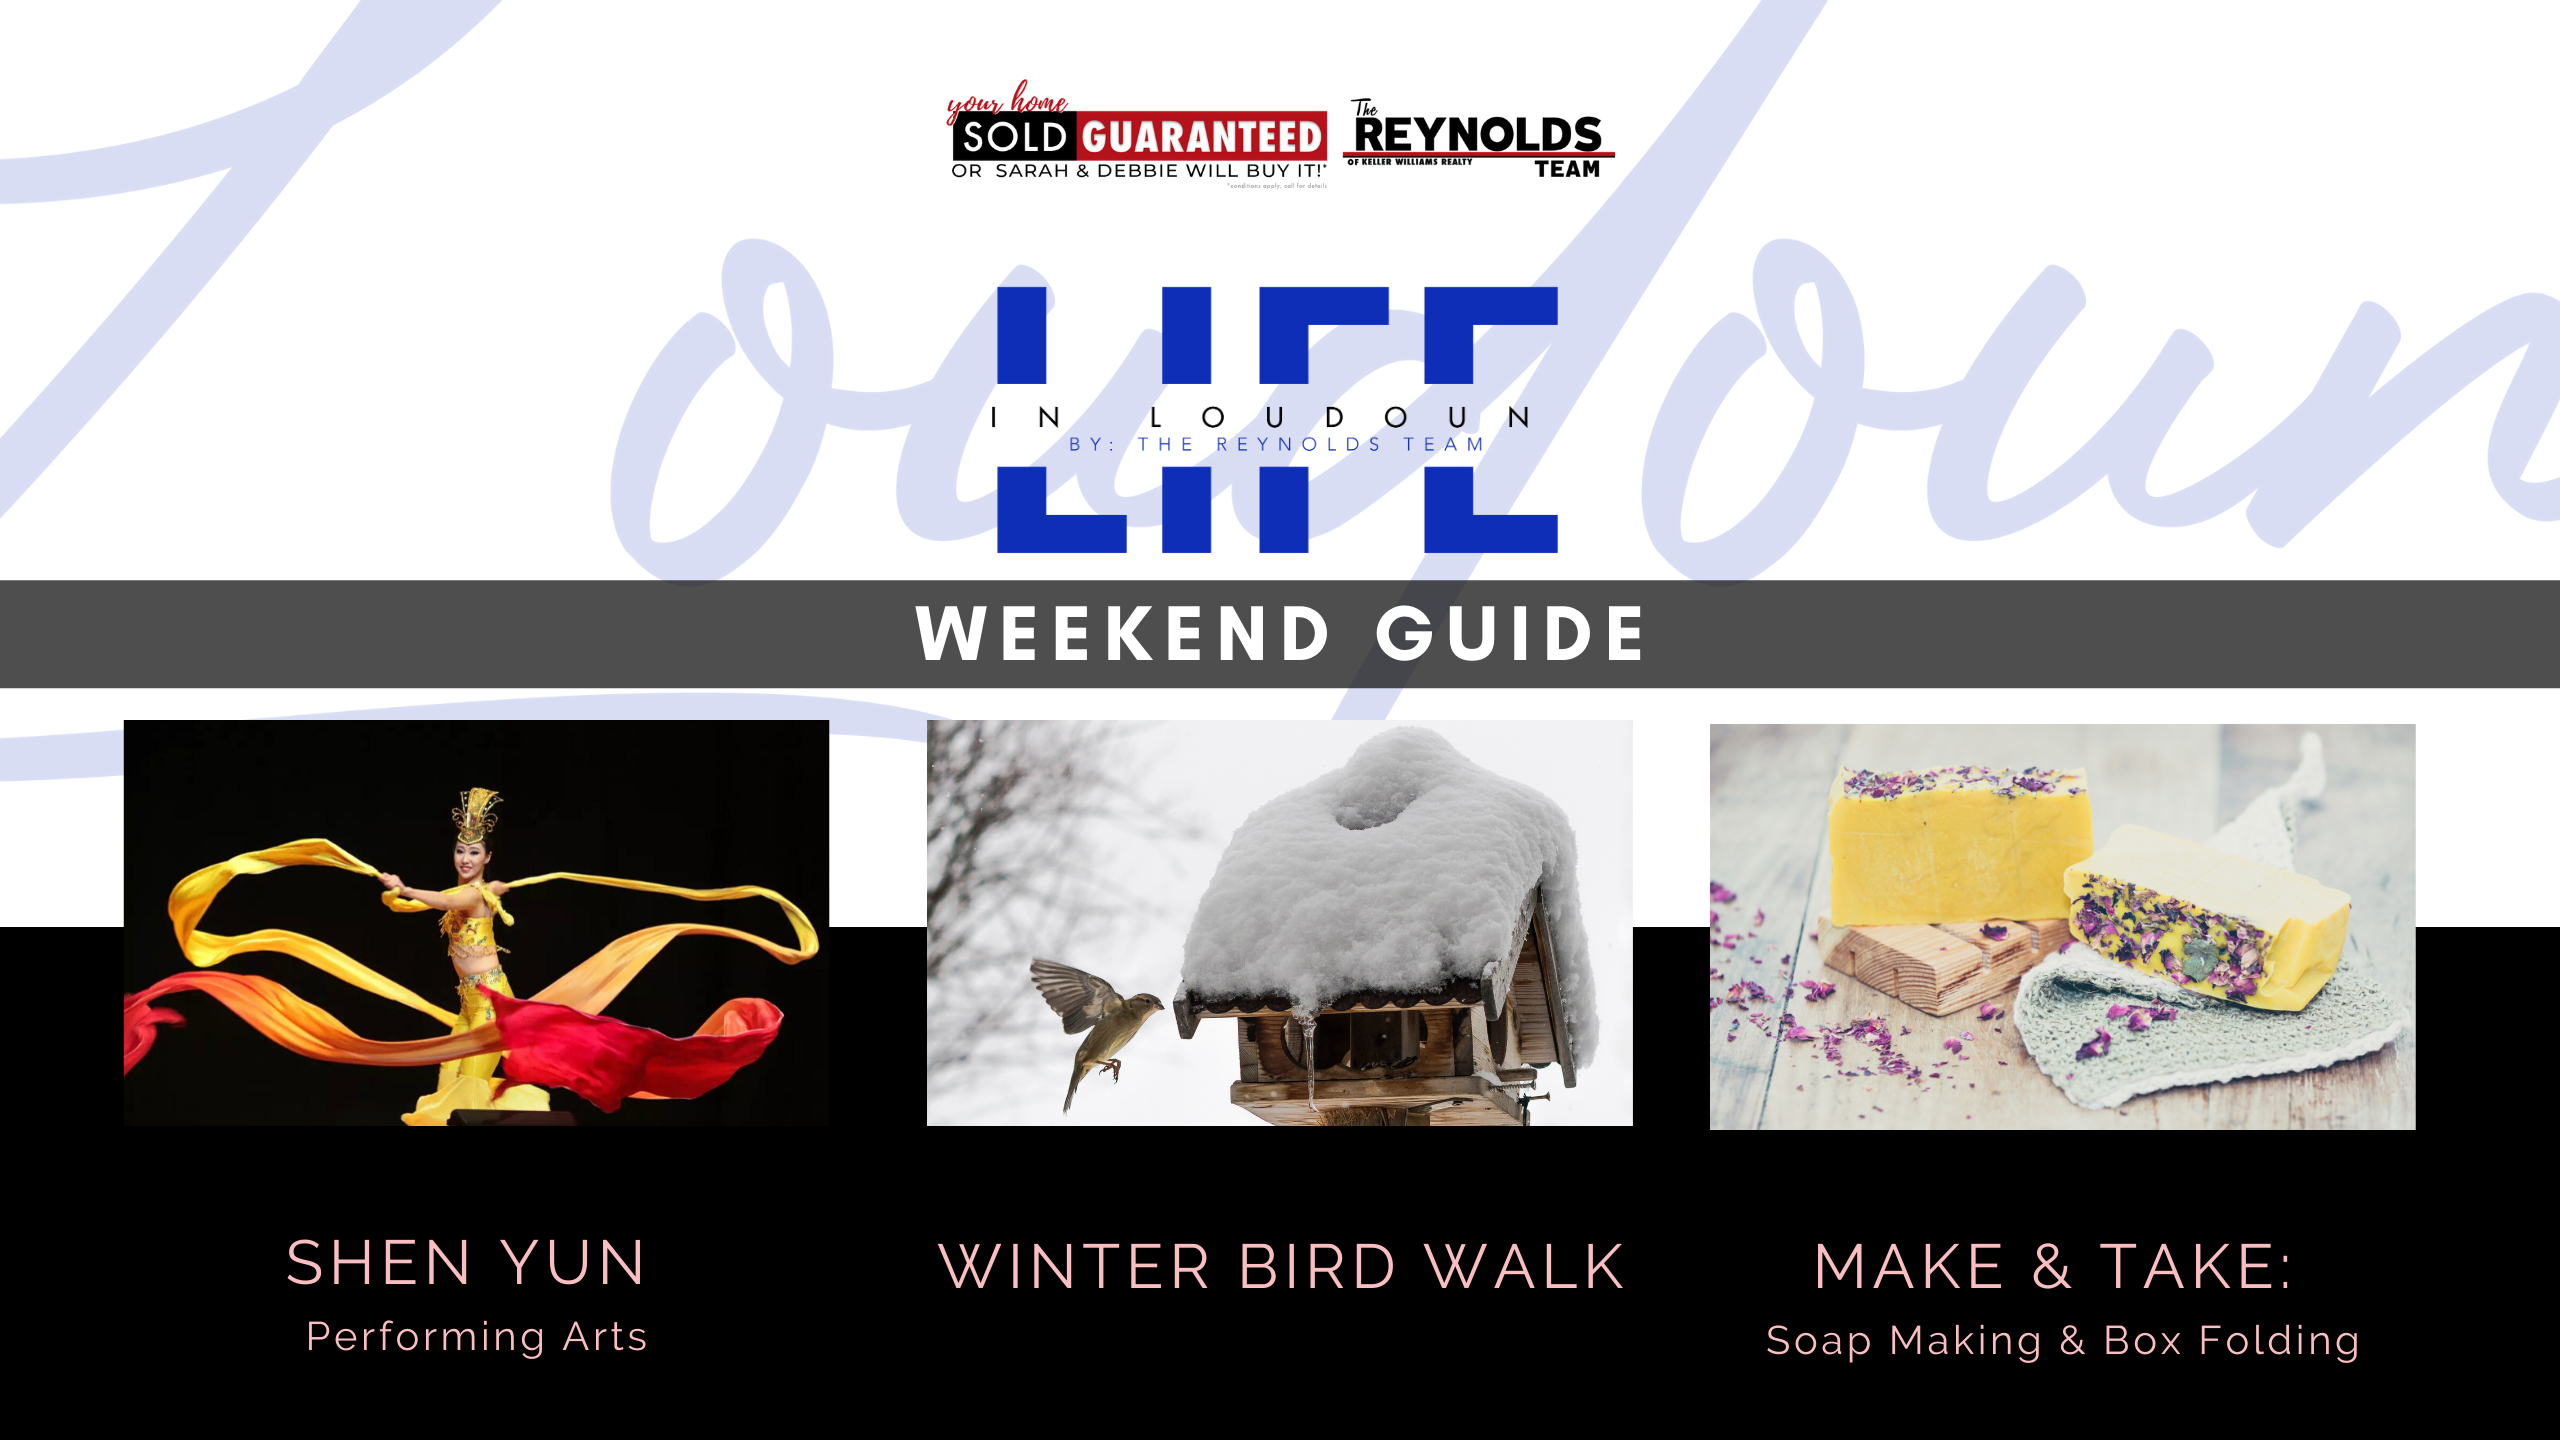 Weekend Events Guide In Loudoun County